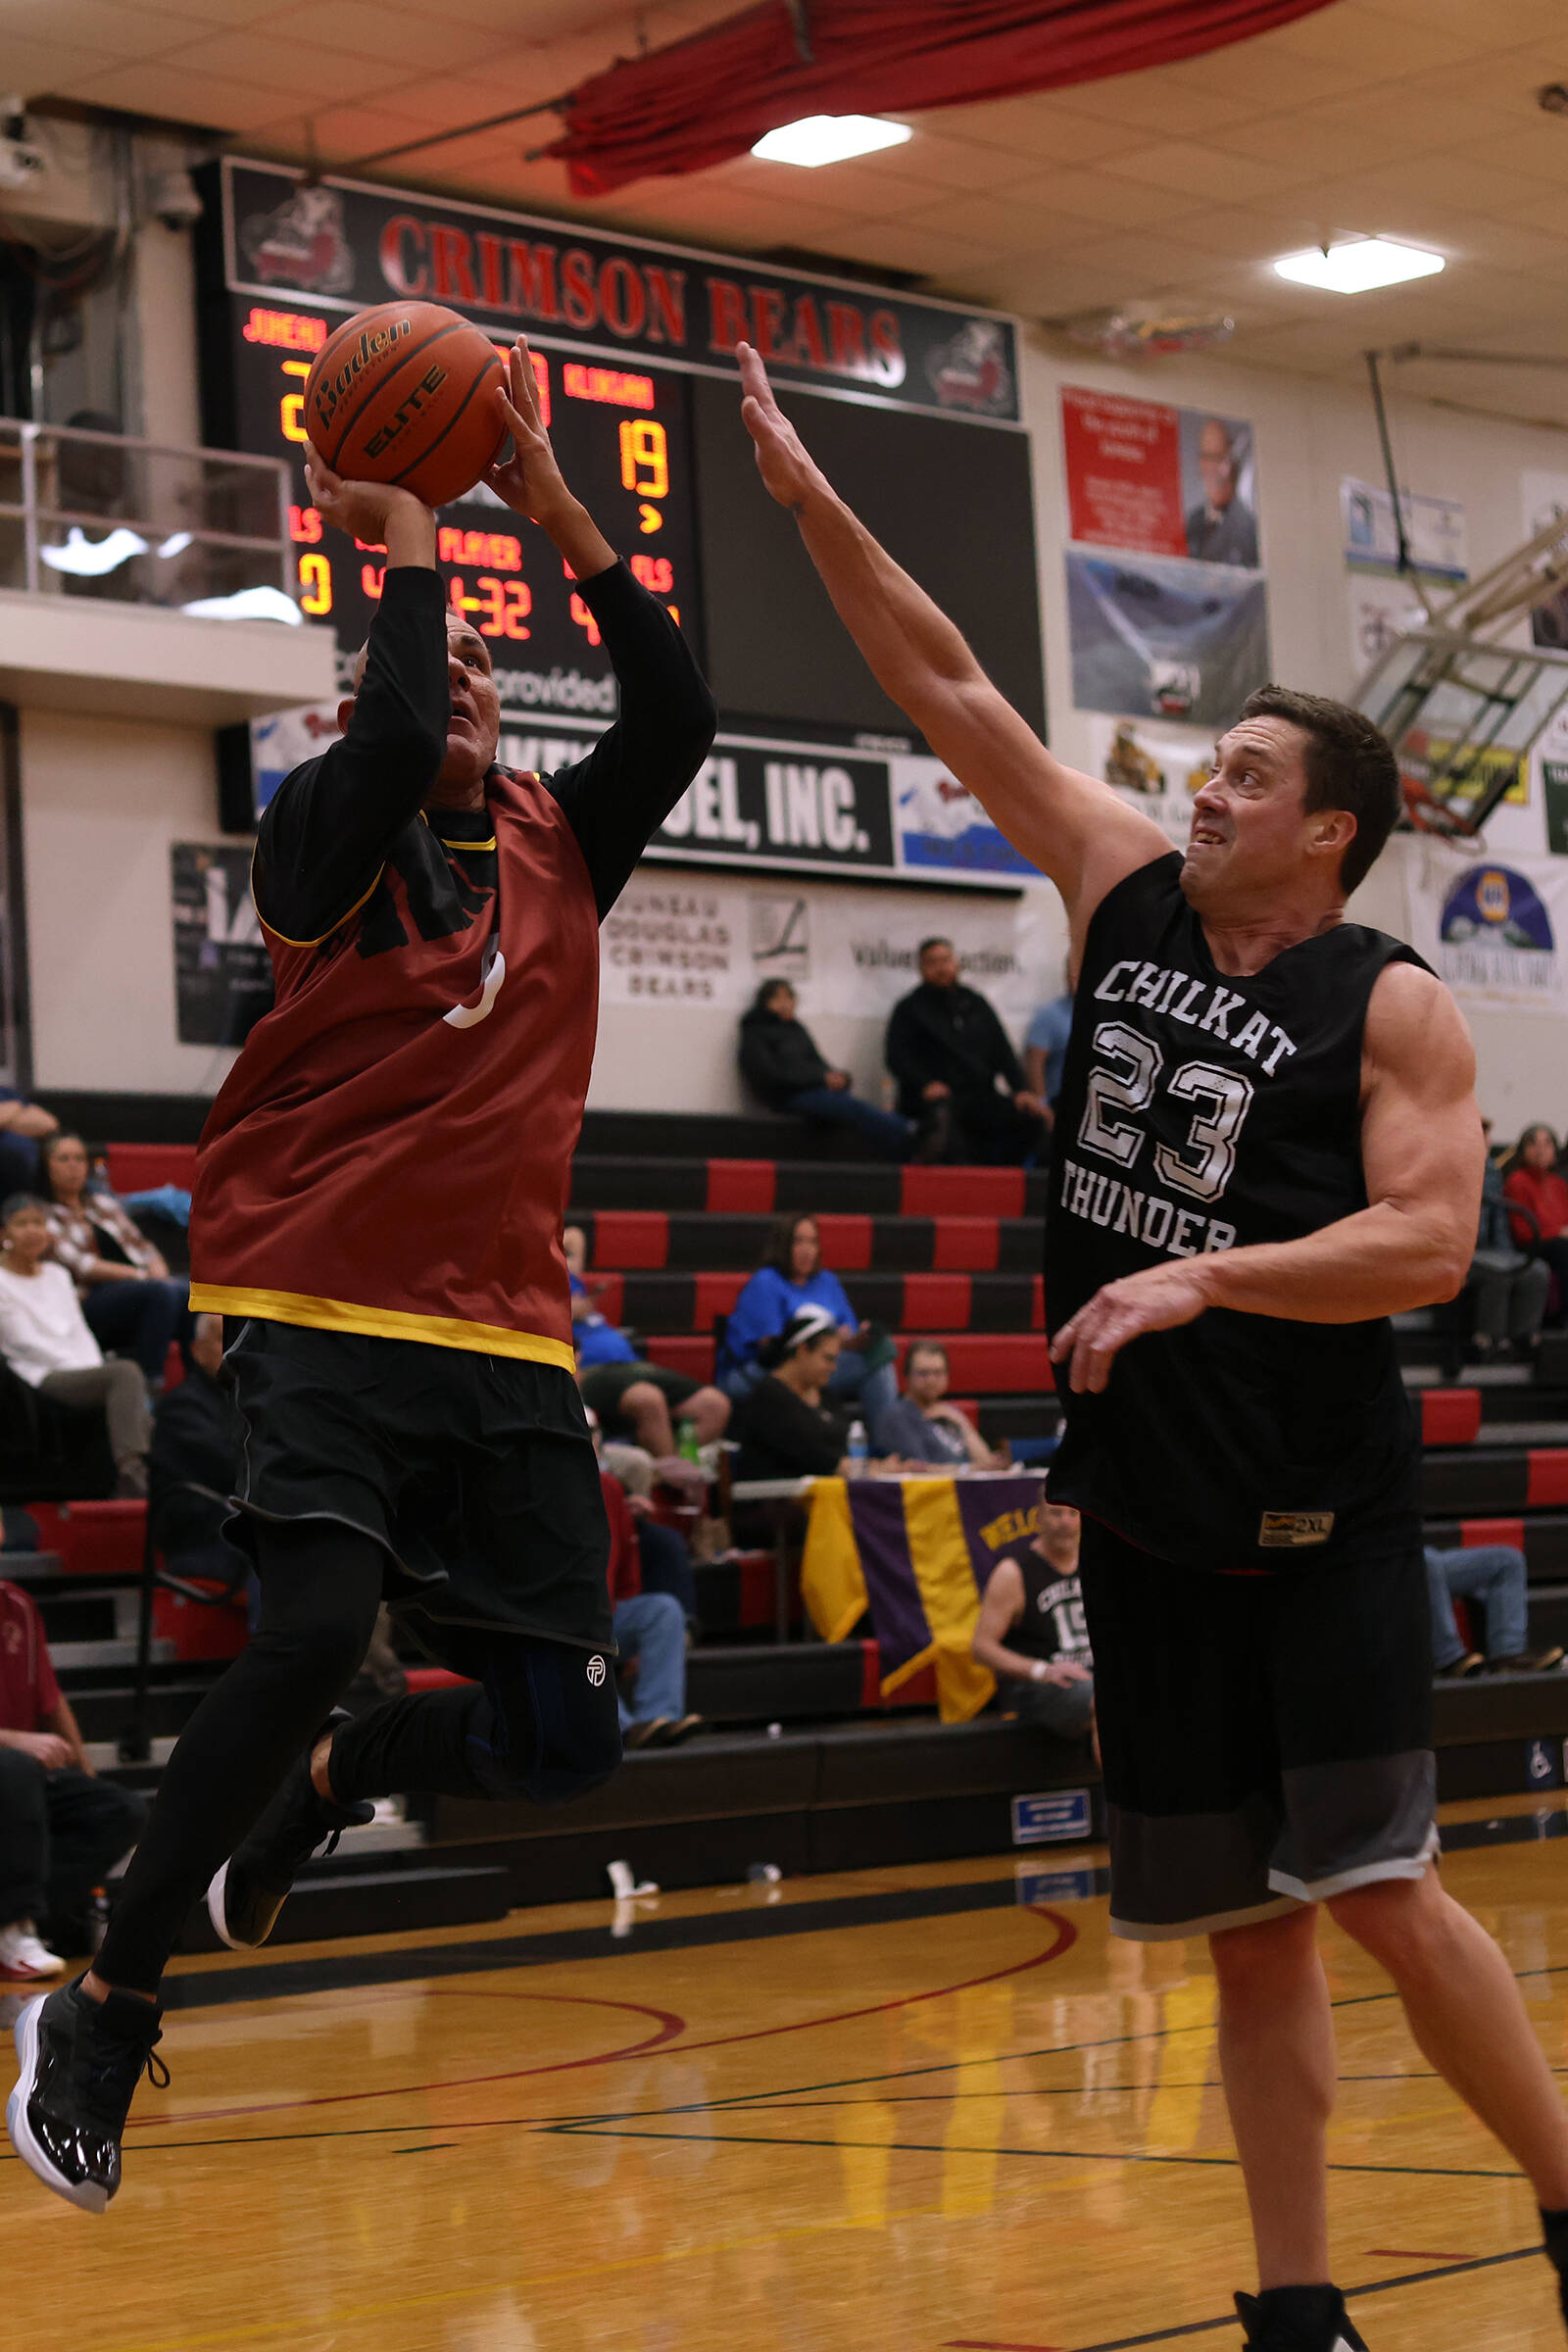 Juneau’s James Mercer (6) shoots while defended by Klukwan’s Russ Stevens in the second quarter of a 48-39 win for Juneau in the Masters Bracket. (Ben Hohenstatt / Juneau Empire)